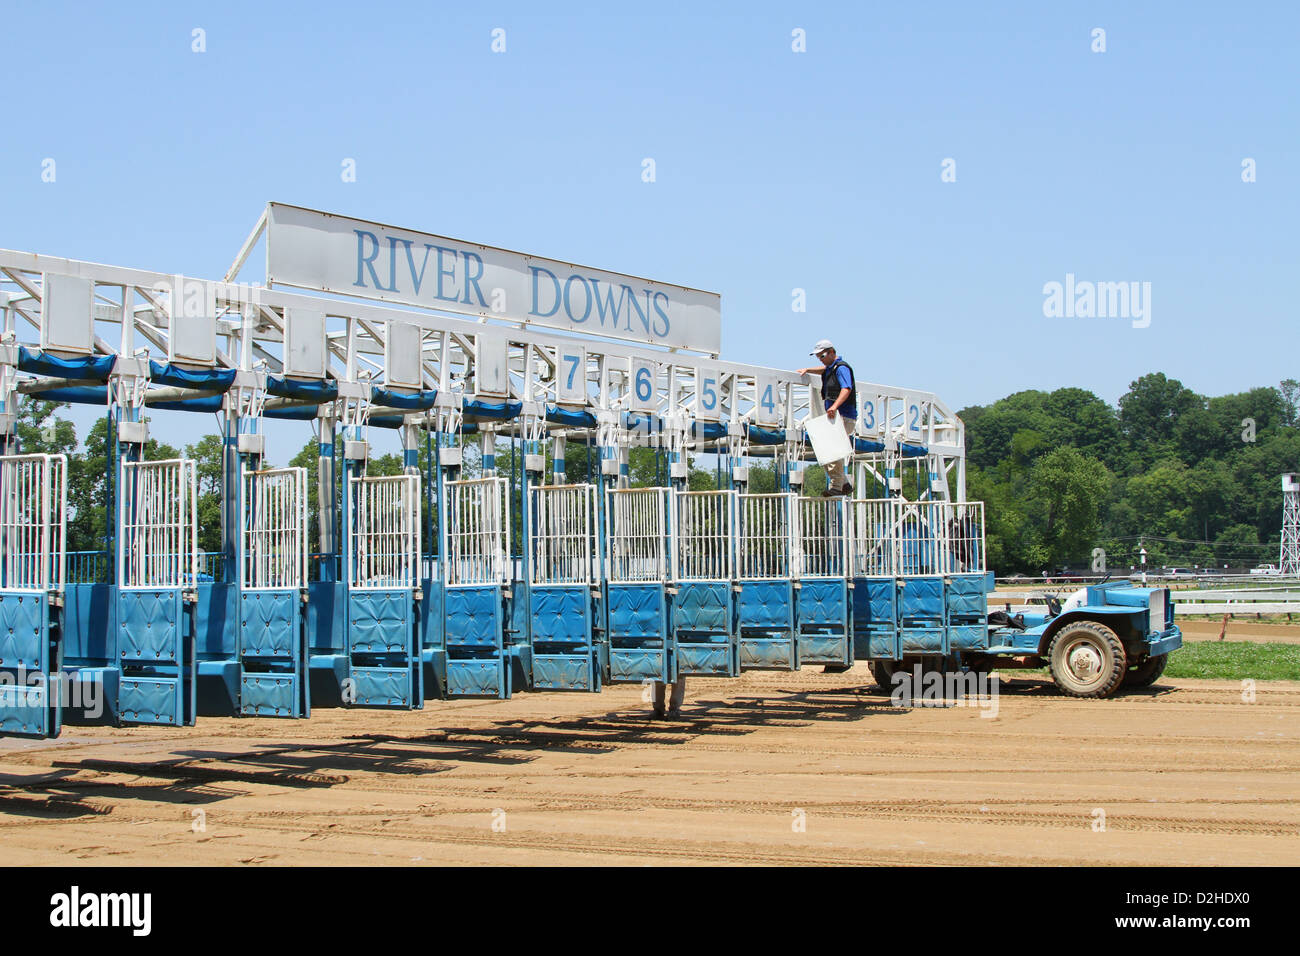 Track worker prepares the Starting Gate. Horse Racing at River Downs track, Cincinnati, Ohio, USA. Stock Photo